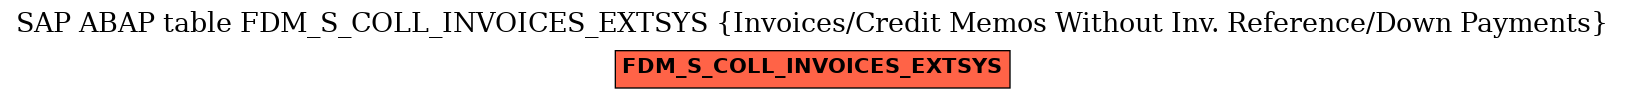 E-R Diagram for table FDM_S_COLL_INVOICES_EXTSYS (Invoices/Credit Memos Without Inv. Reference/Down Payments)